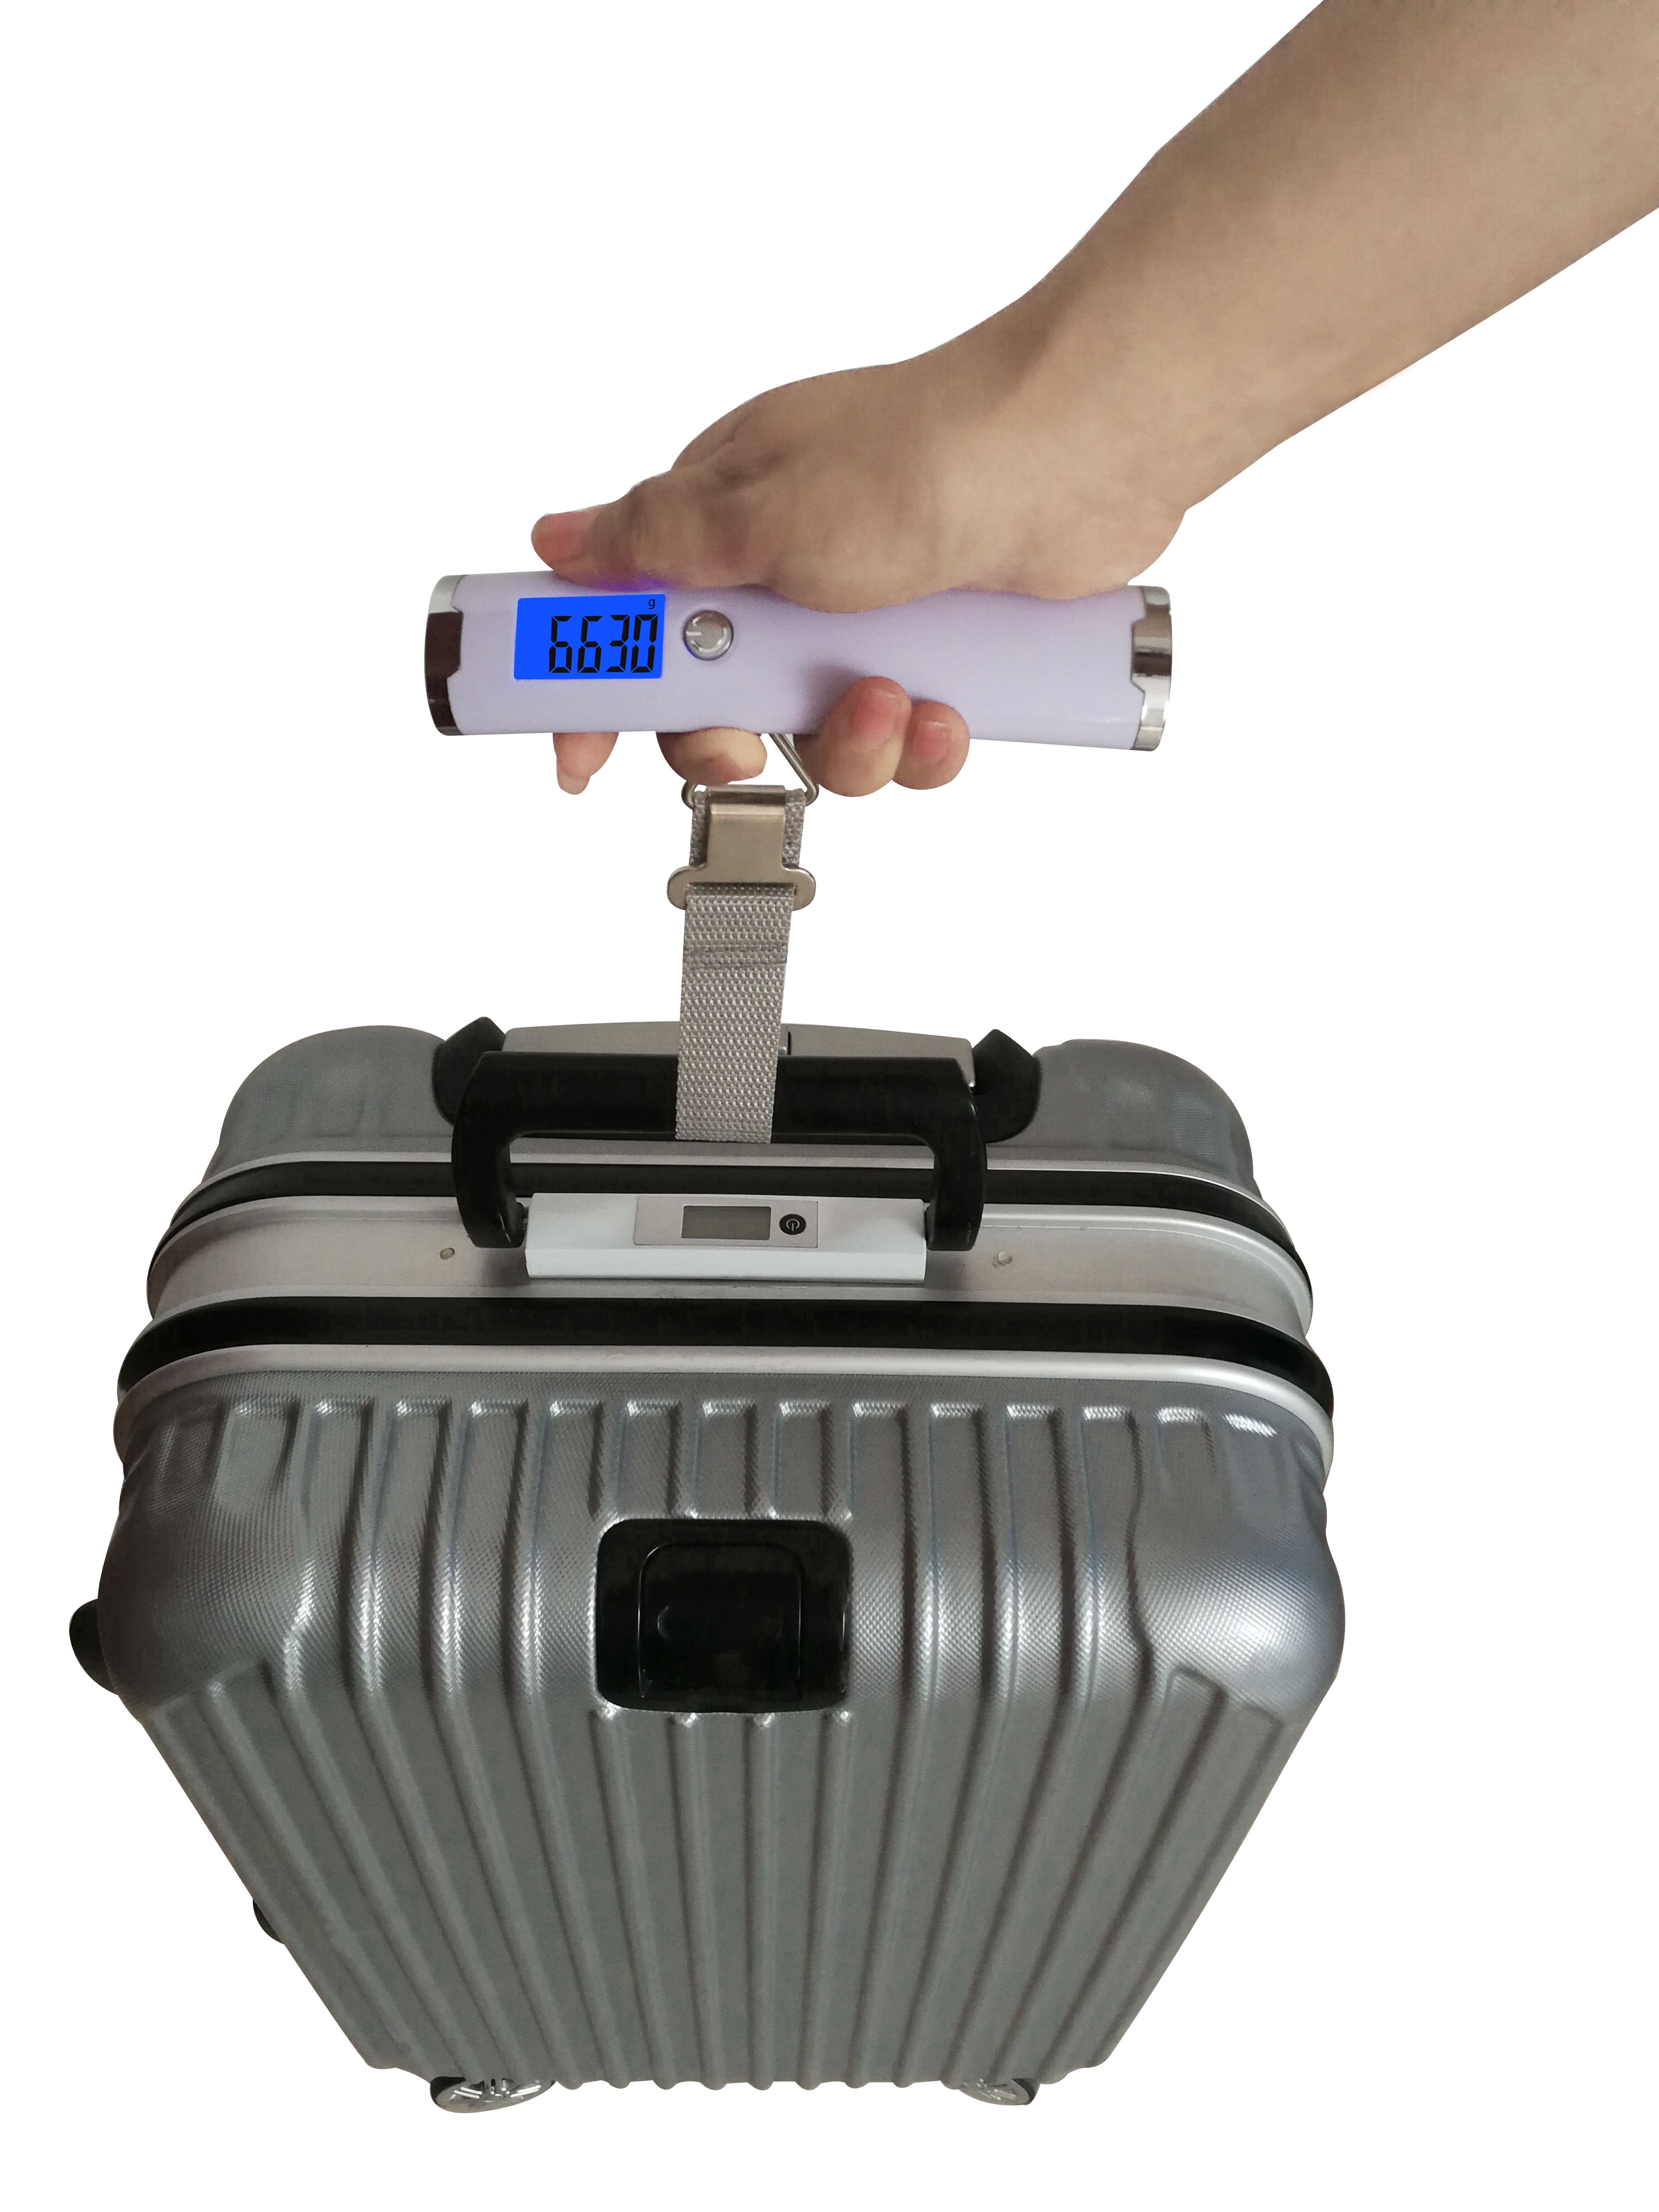 Protege 80lb Capacity Manual Travel Luggage Scale with Strap - 4.5 x 3 x 1.2 in